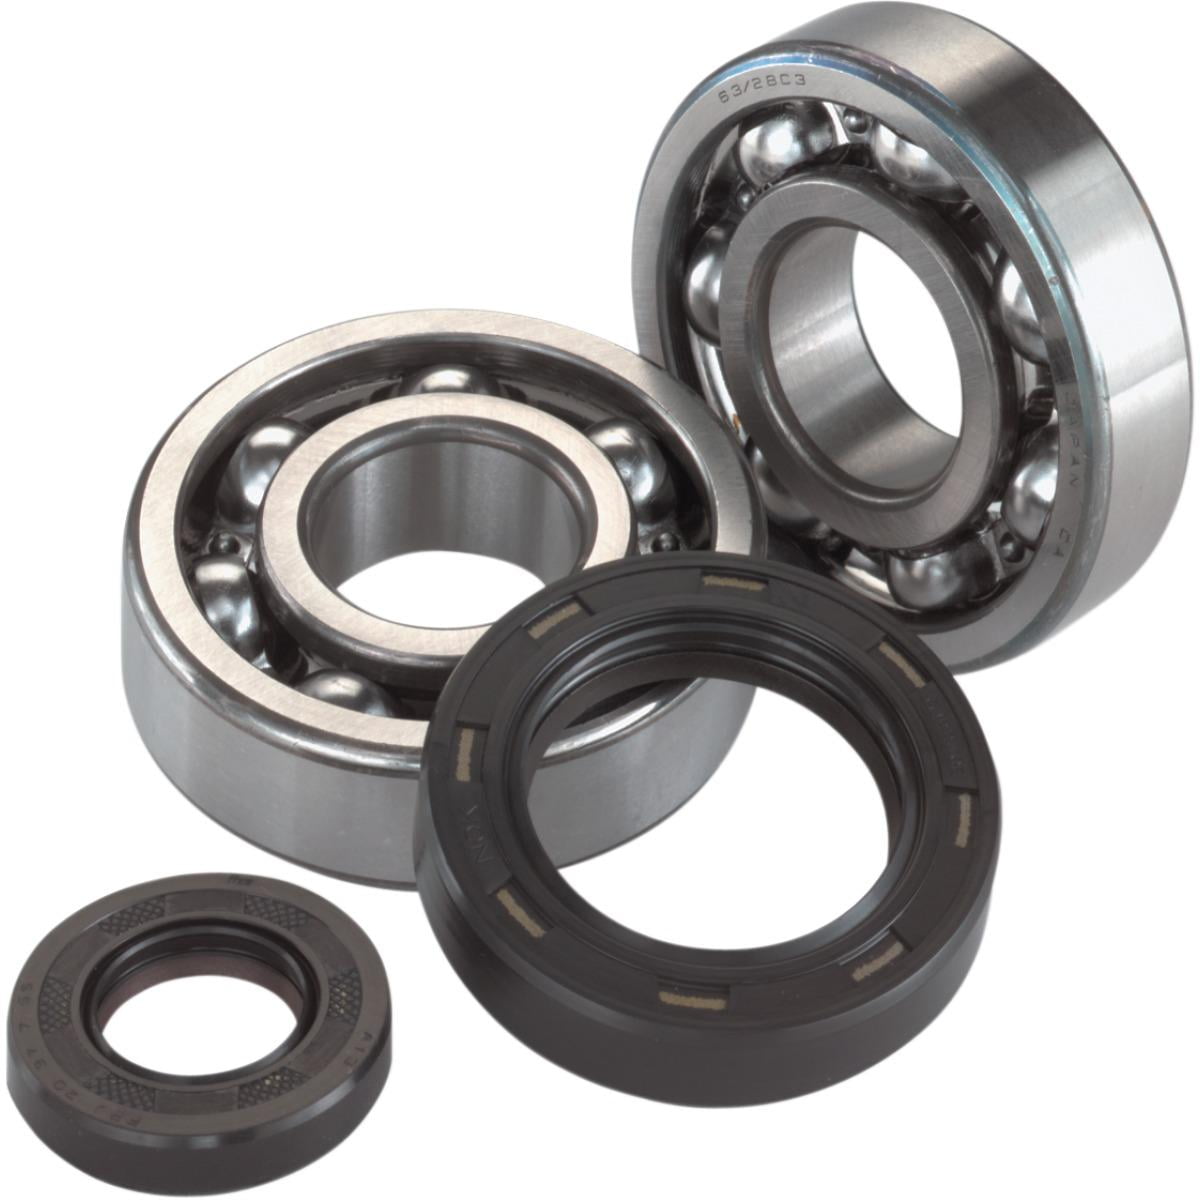 2 KOYO Japanese Rear Axle Shaft Wheel Bearing  With Seal set for  FORD MUSTANG